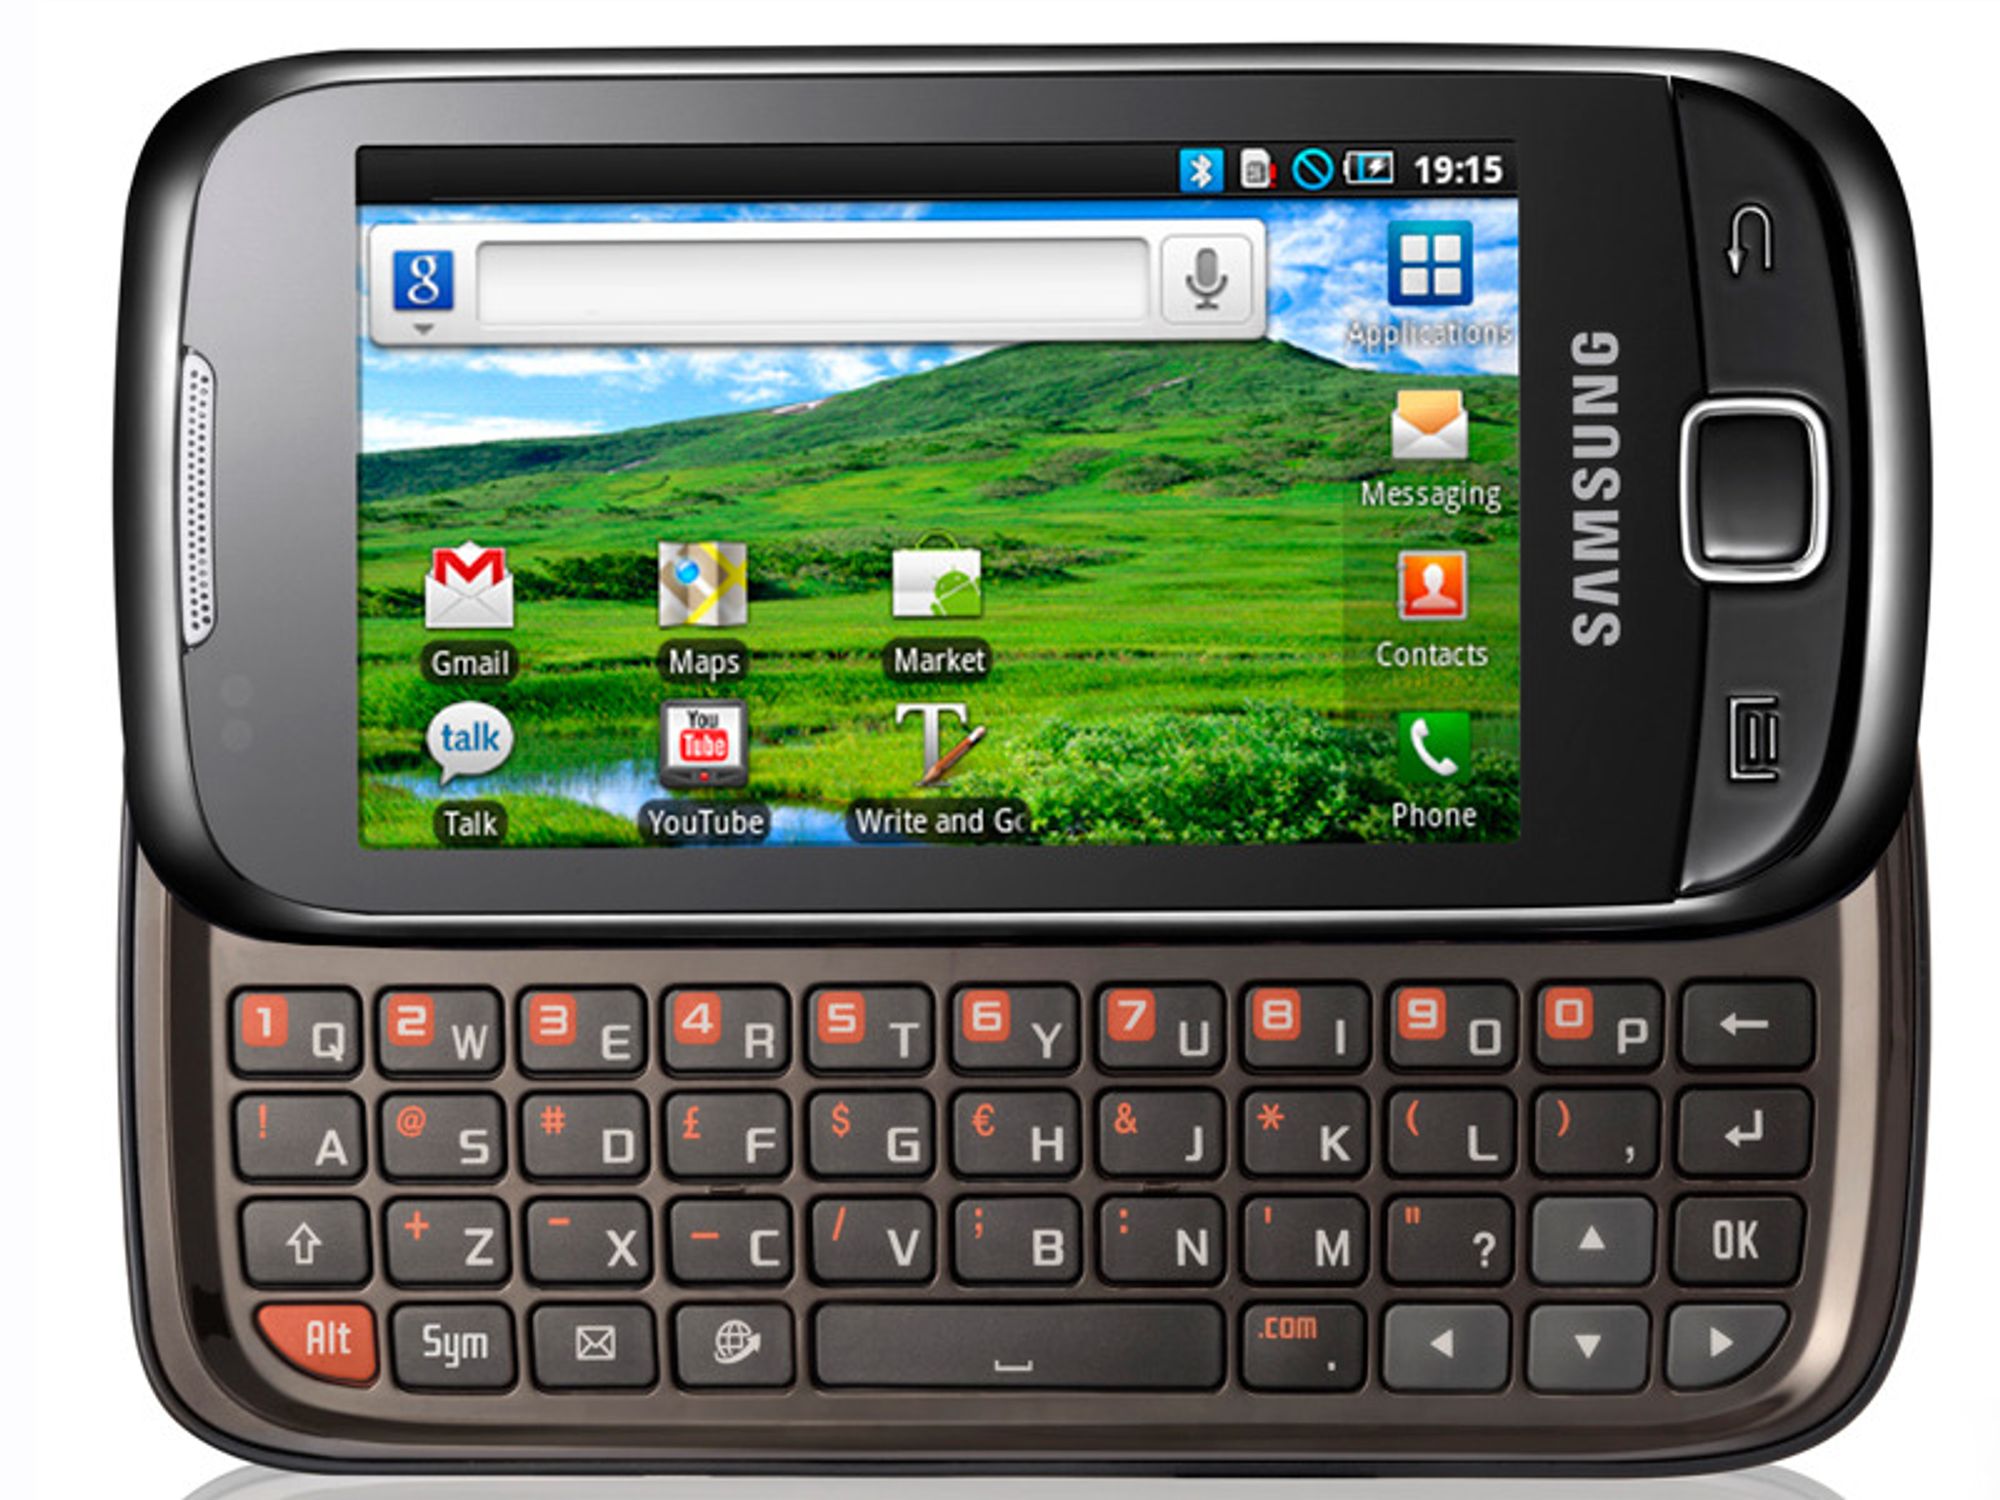 Qwerty-Android fra Samsung